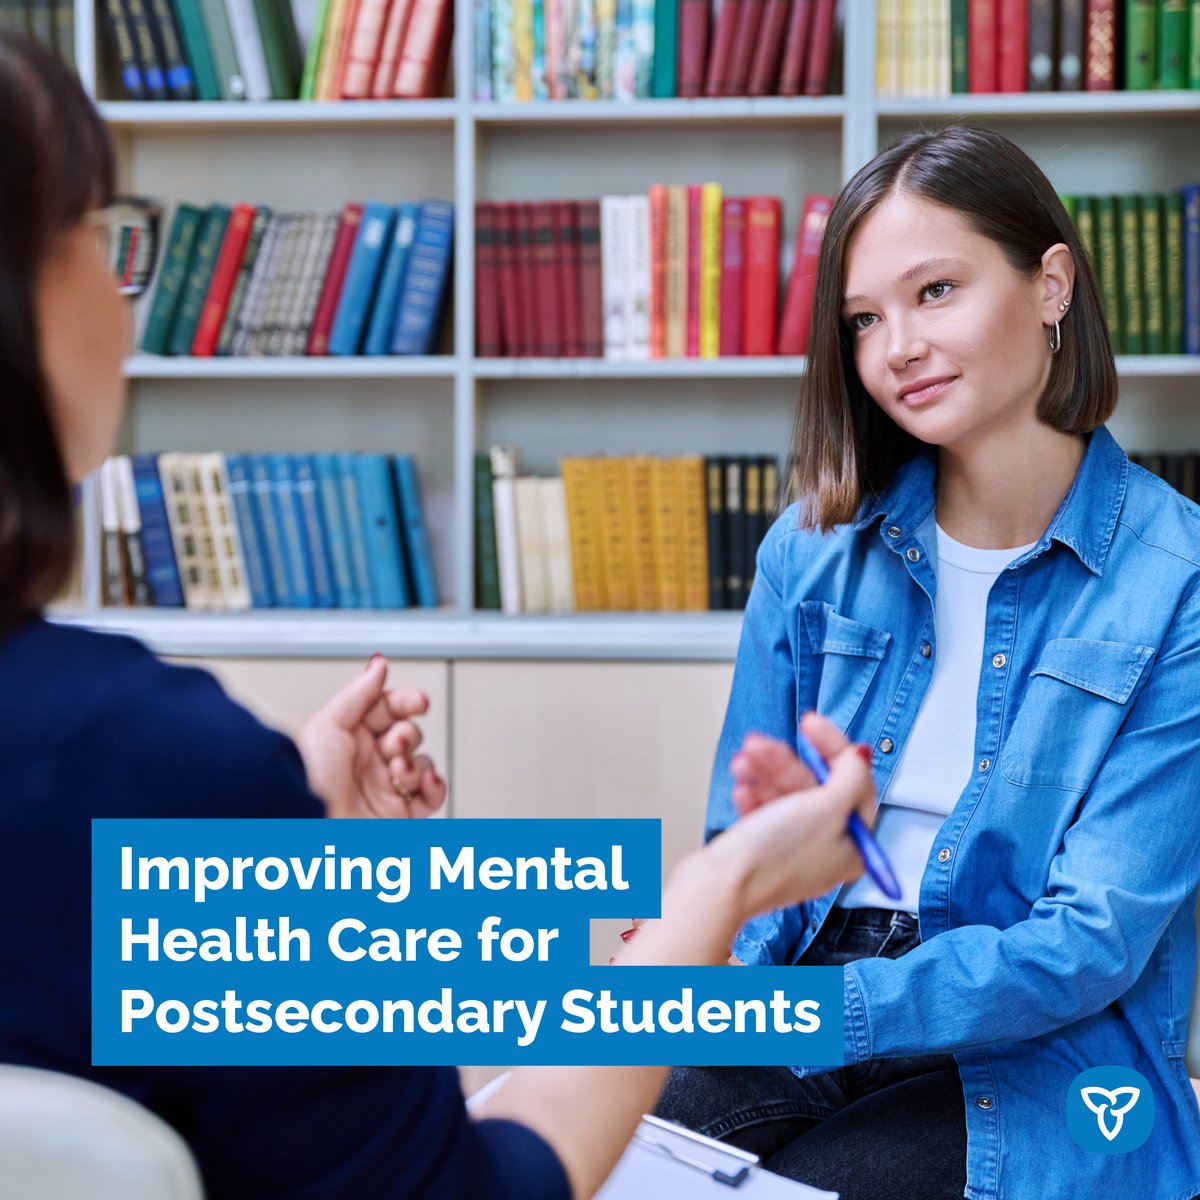 Ontario Improving Mental Health Care for Postsecondary Students by investing $5 million for student mental health supports at 10 underserved #ONpse institutions. Learn more: news.ontario.ca/en/release/100…